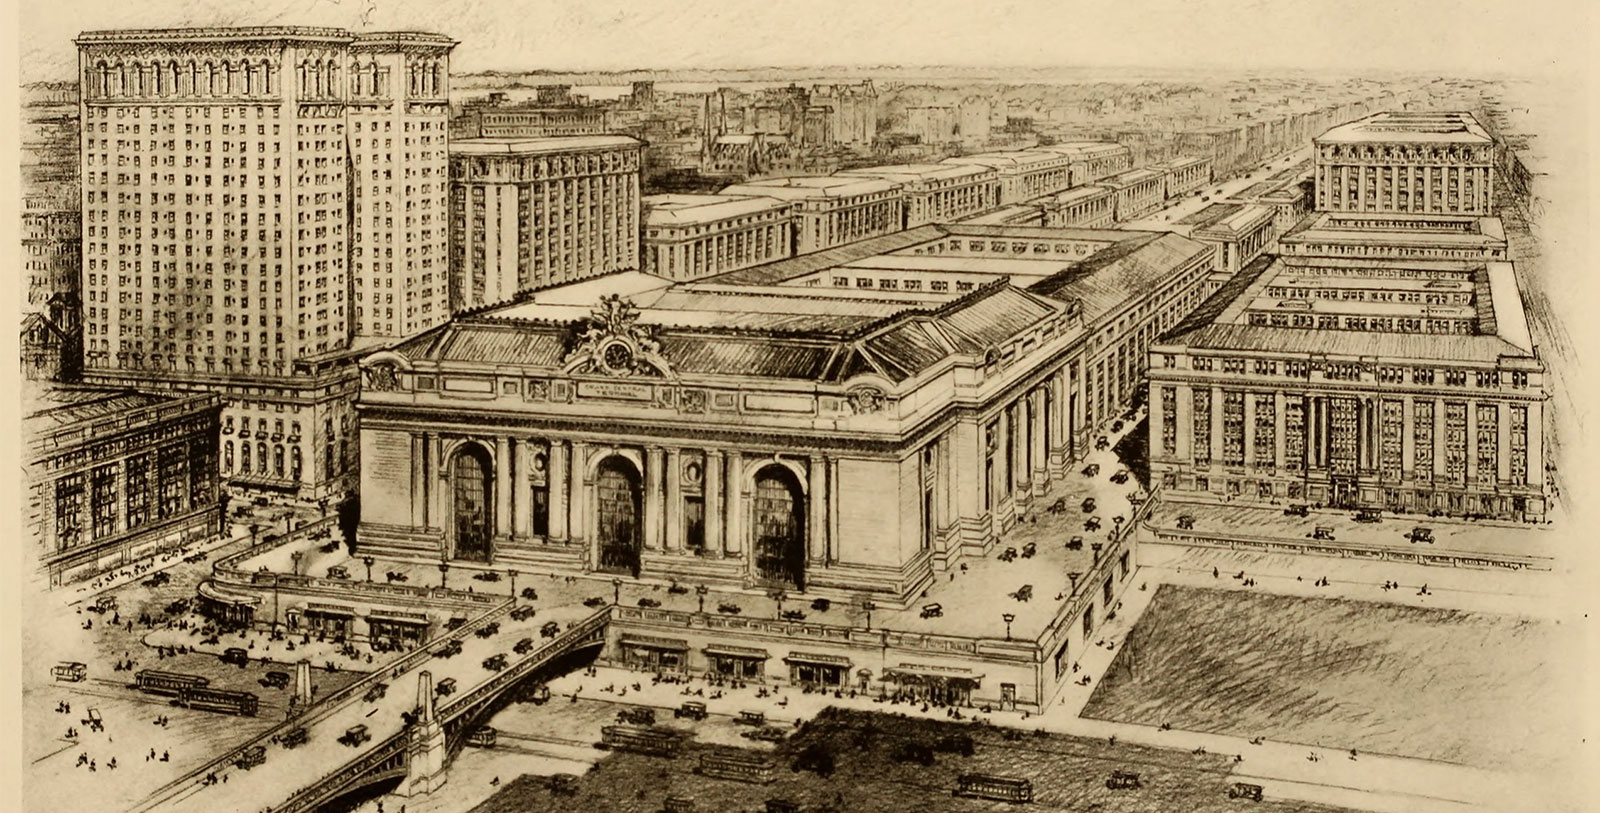 Discover Warren & Wetmore’s Terminal City vision through the Omni Berkshire Place’s Beaux-Arts integrated architectural connection with Grand Central Terminal.